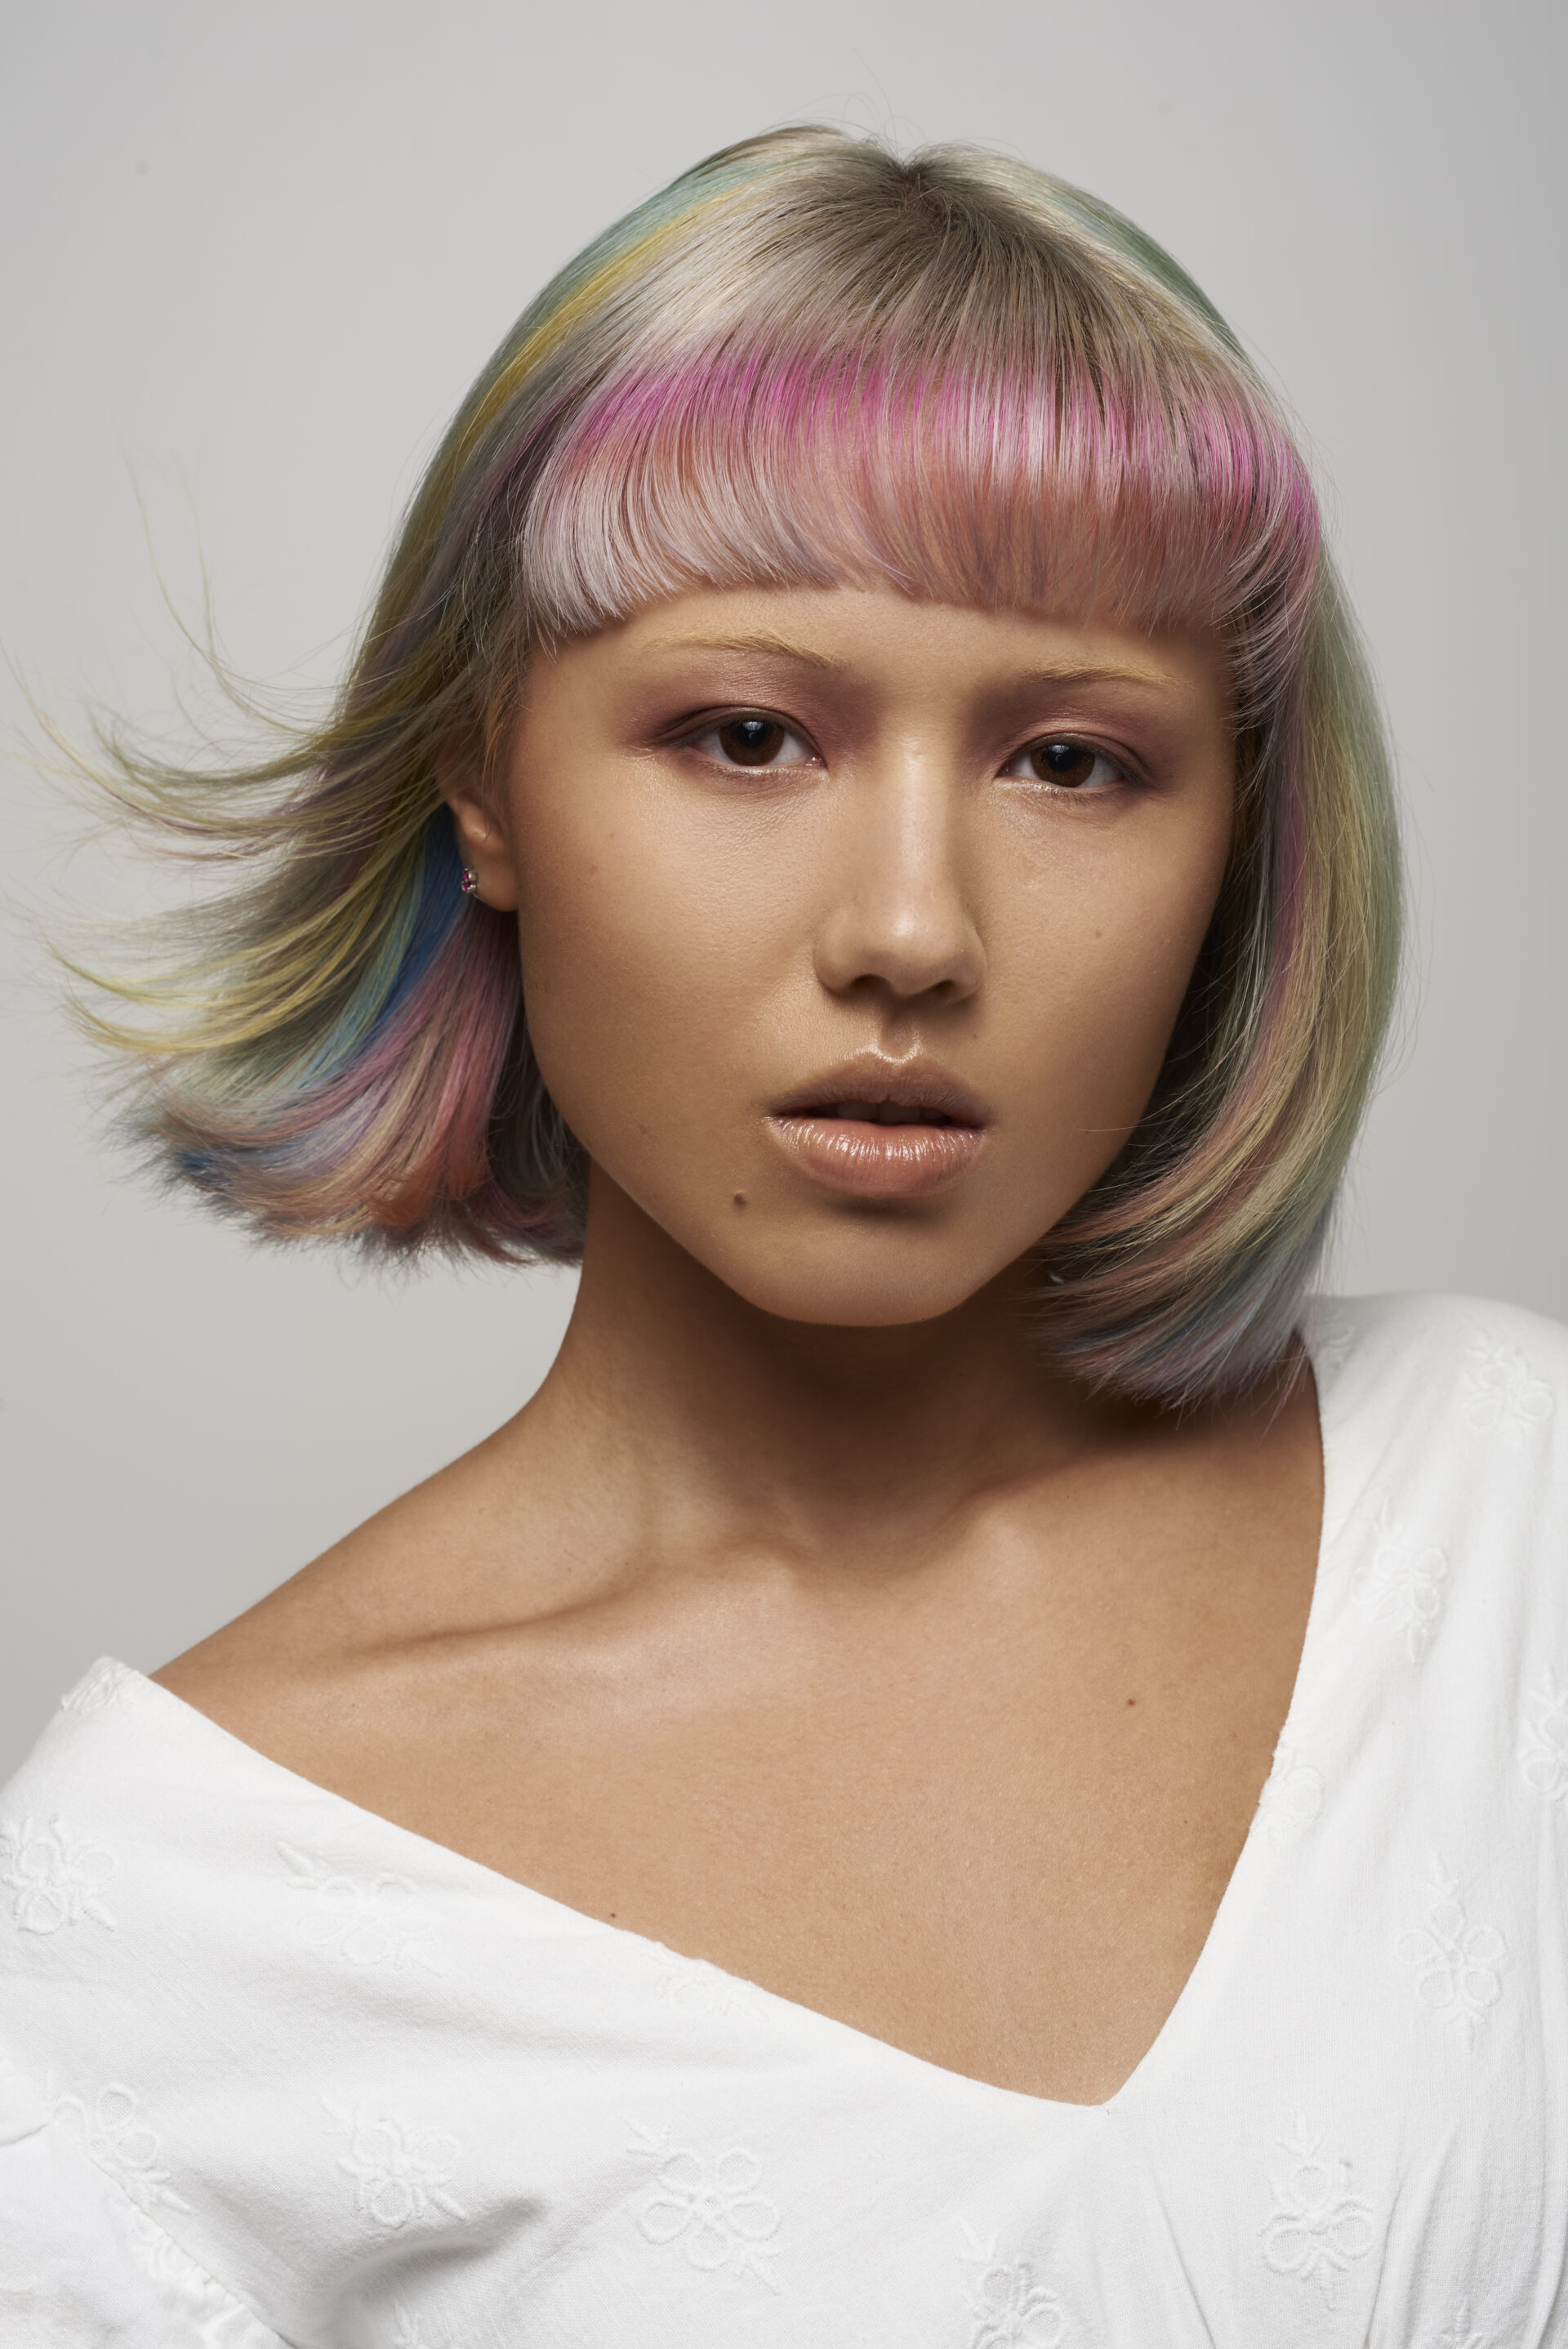 Model on a grey background with Pink, Blue, Yellow coloured hair.